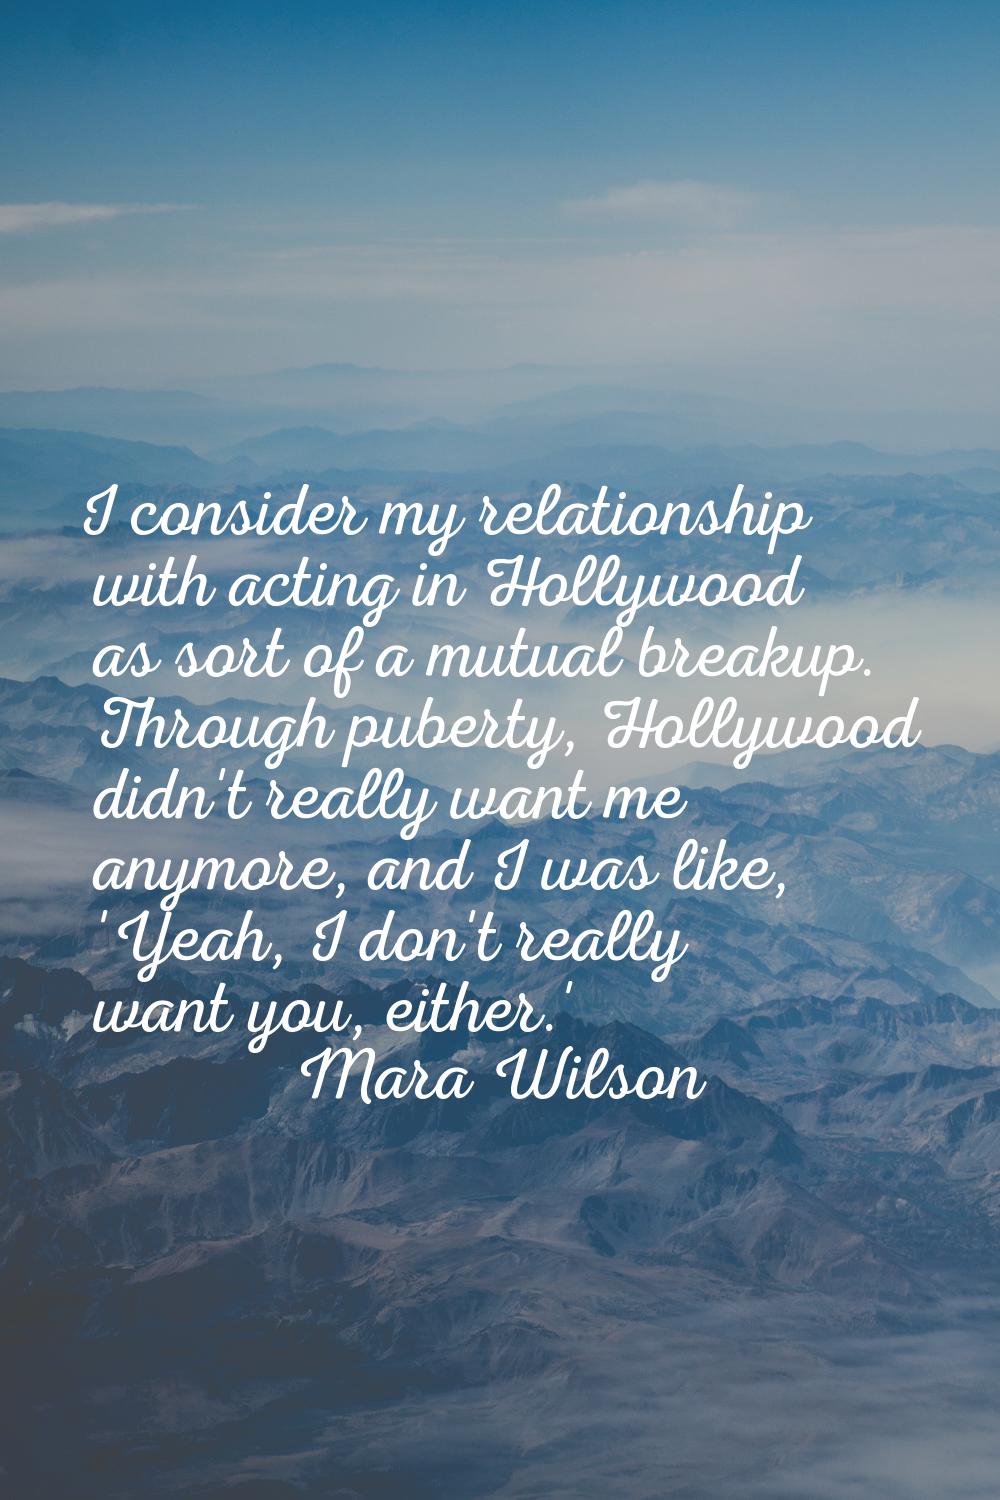 I consider my relationship with acting in Hollywood as sort of a mutual breakup. Through puberty, H